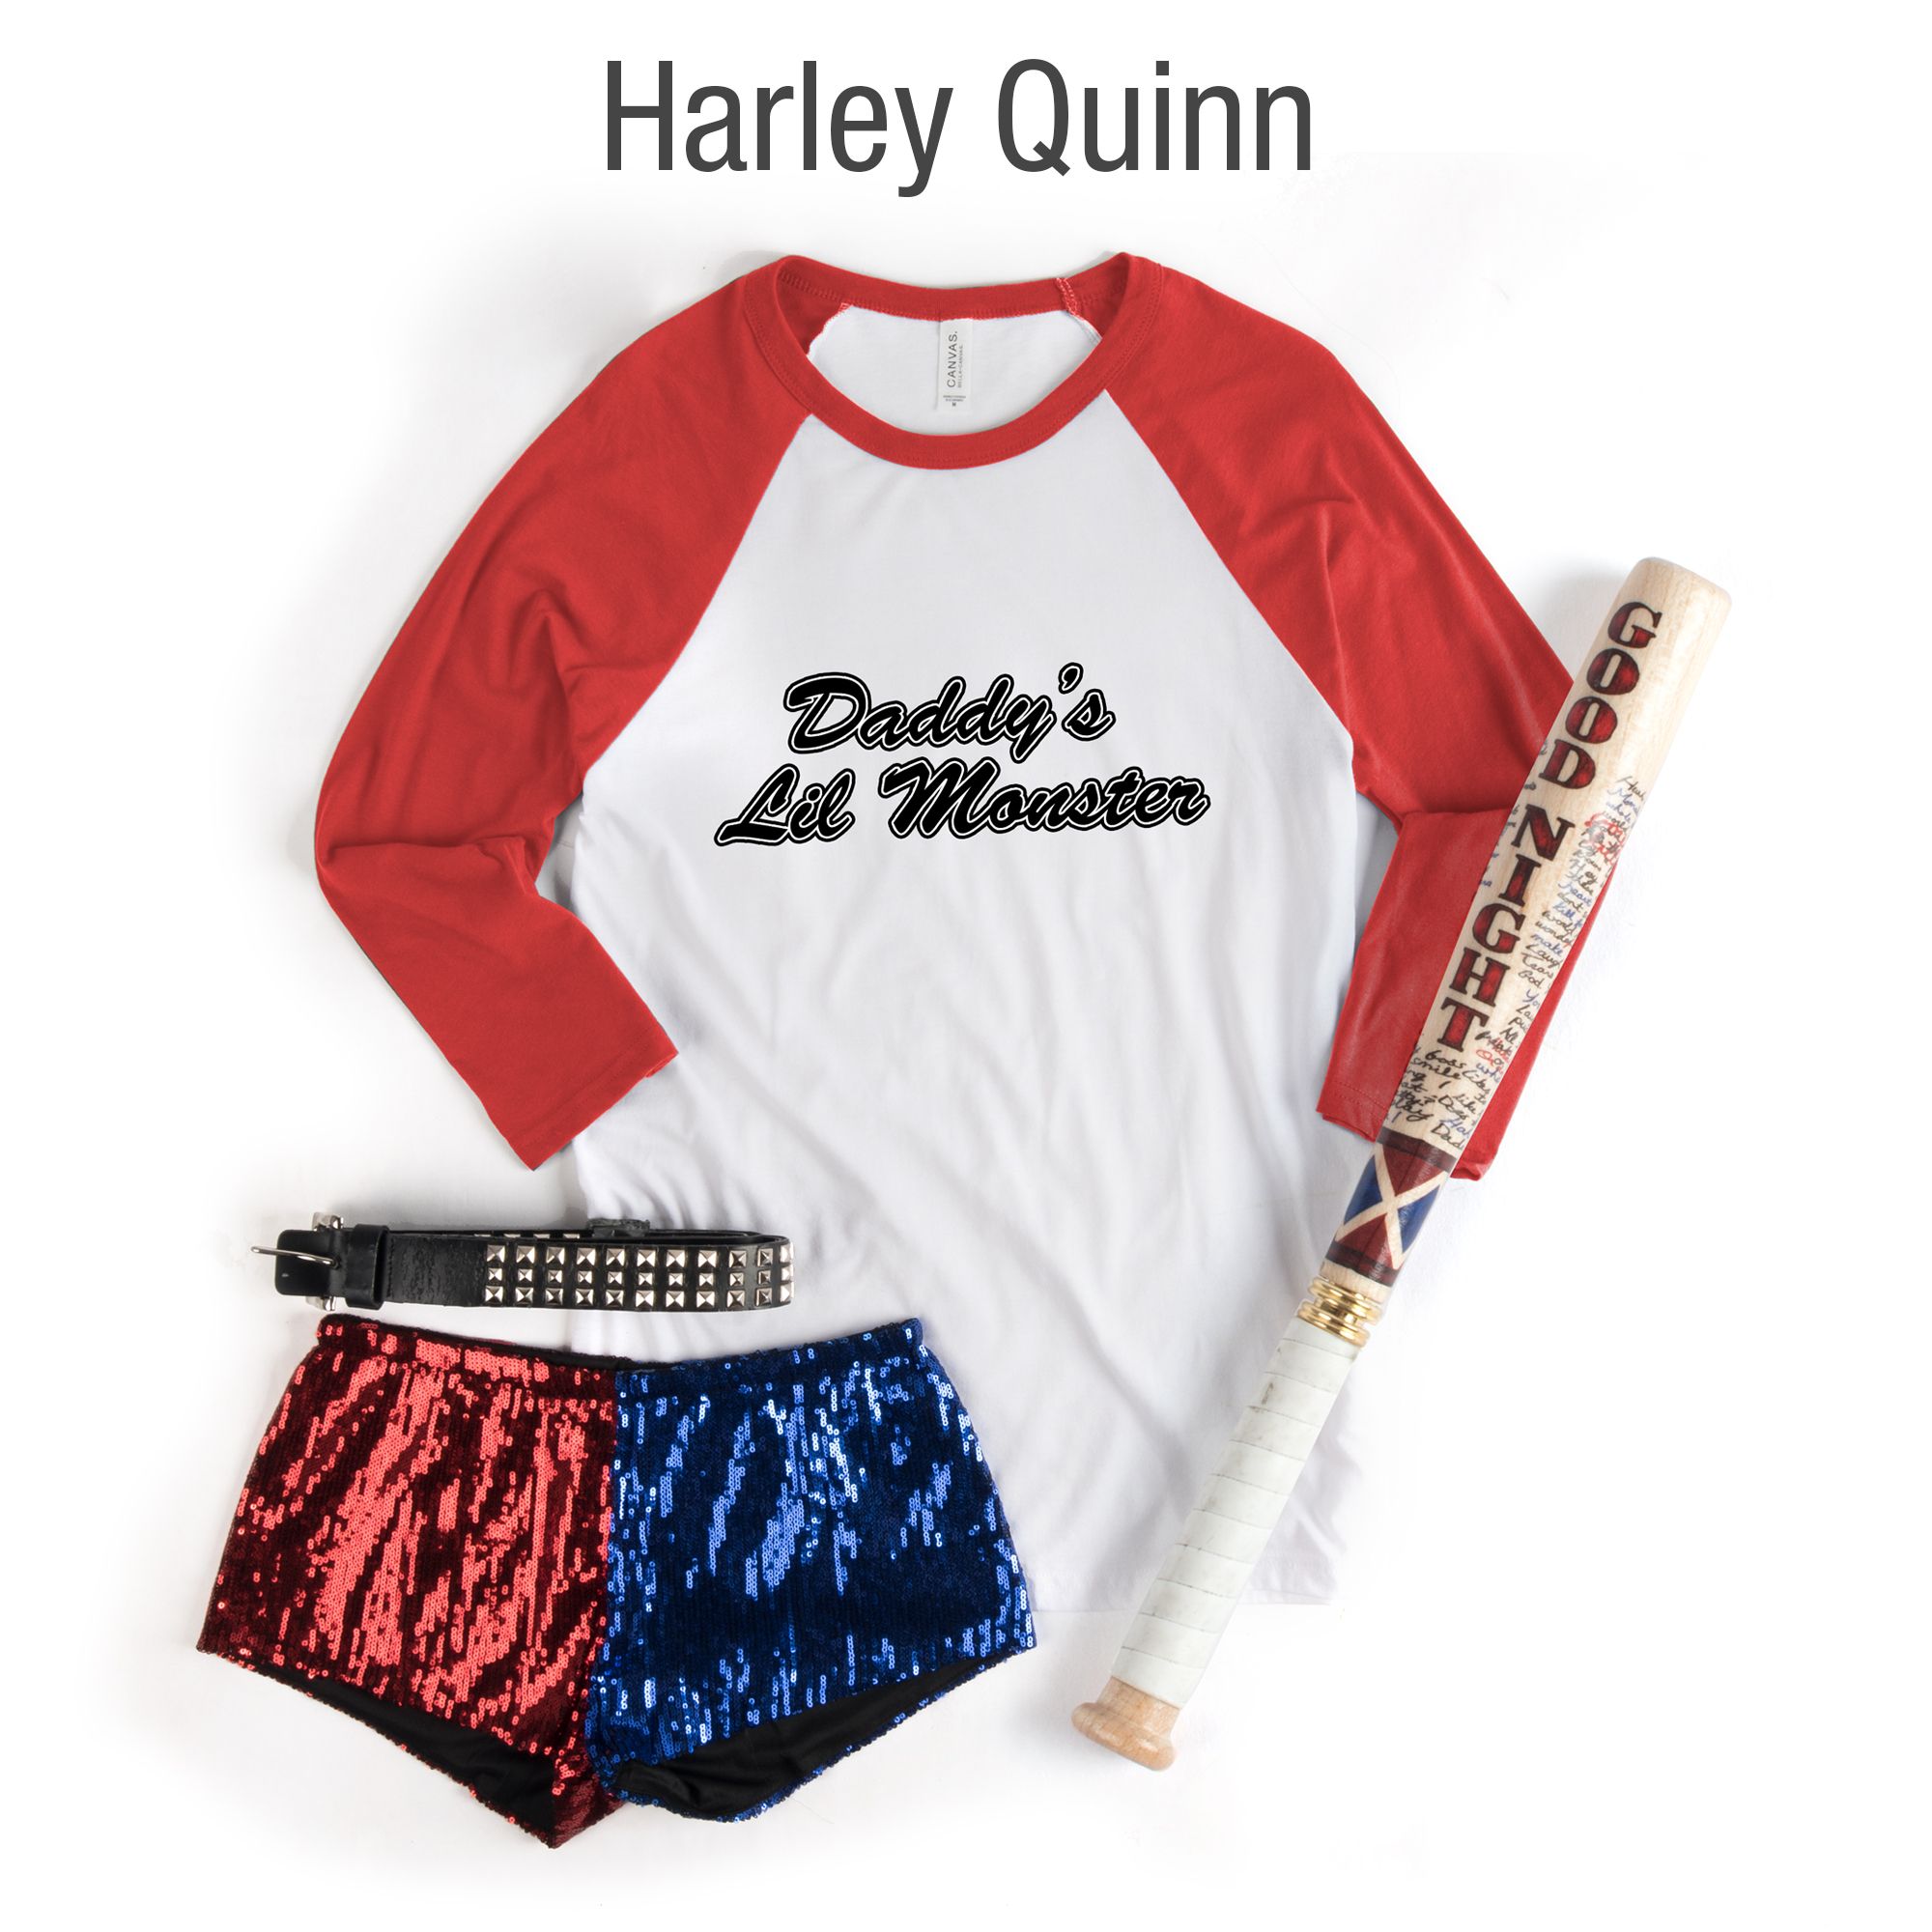 Our Harley Quinn example Halloween costume.